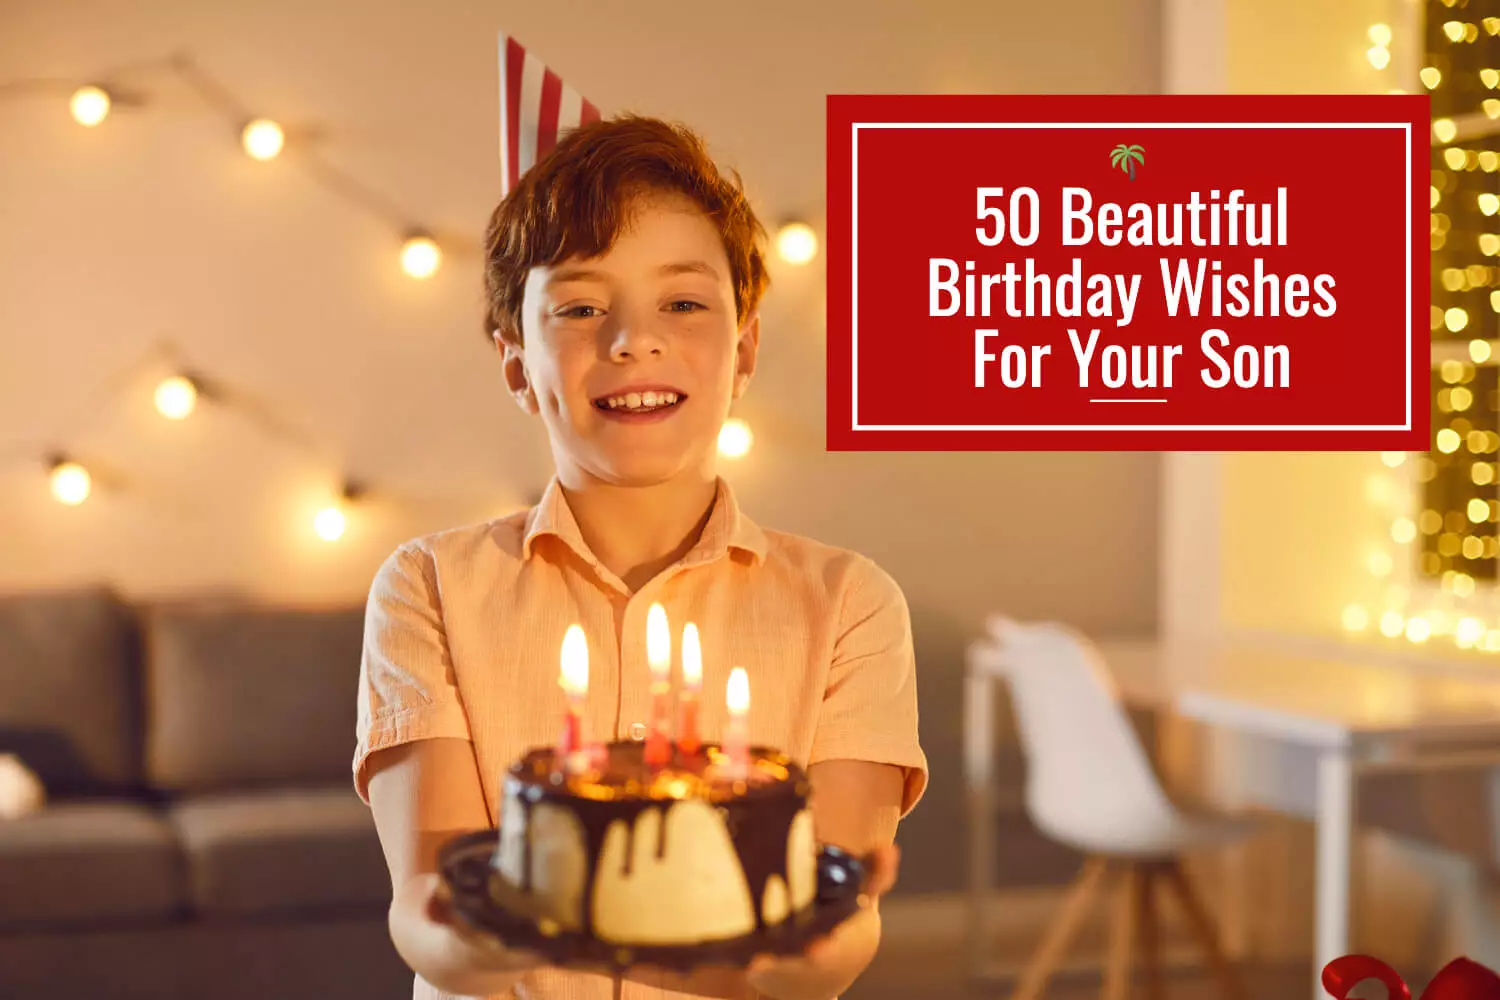 100 Beautiful Birthday Wishes For Your Son